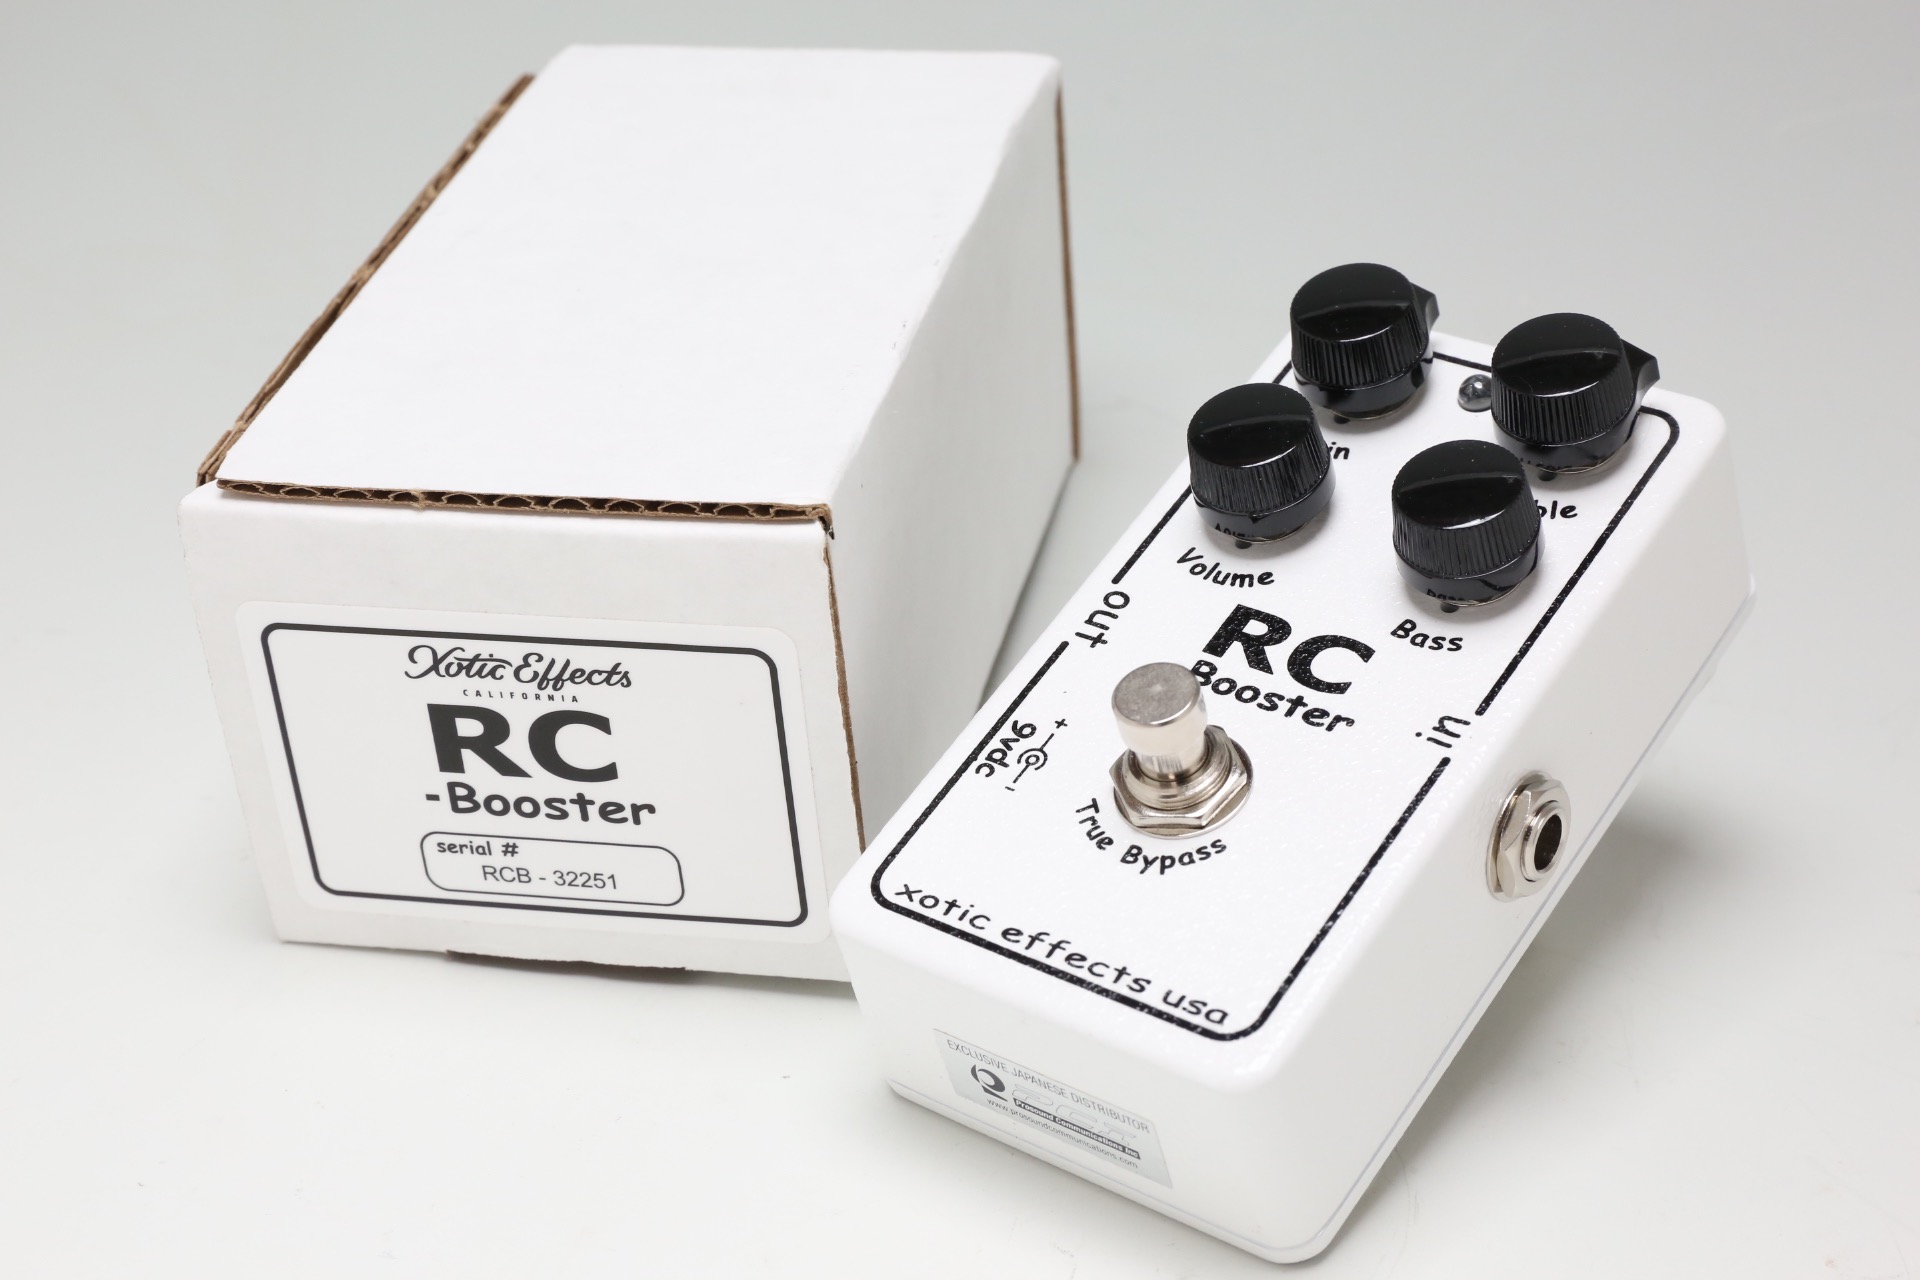 Xotic effects RC Booster